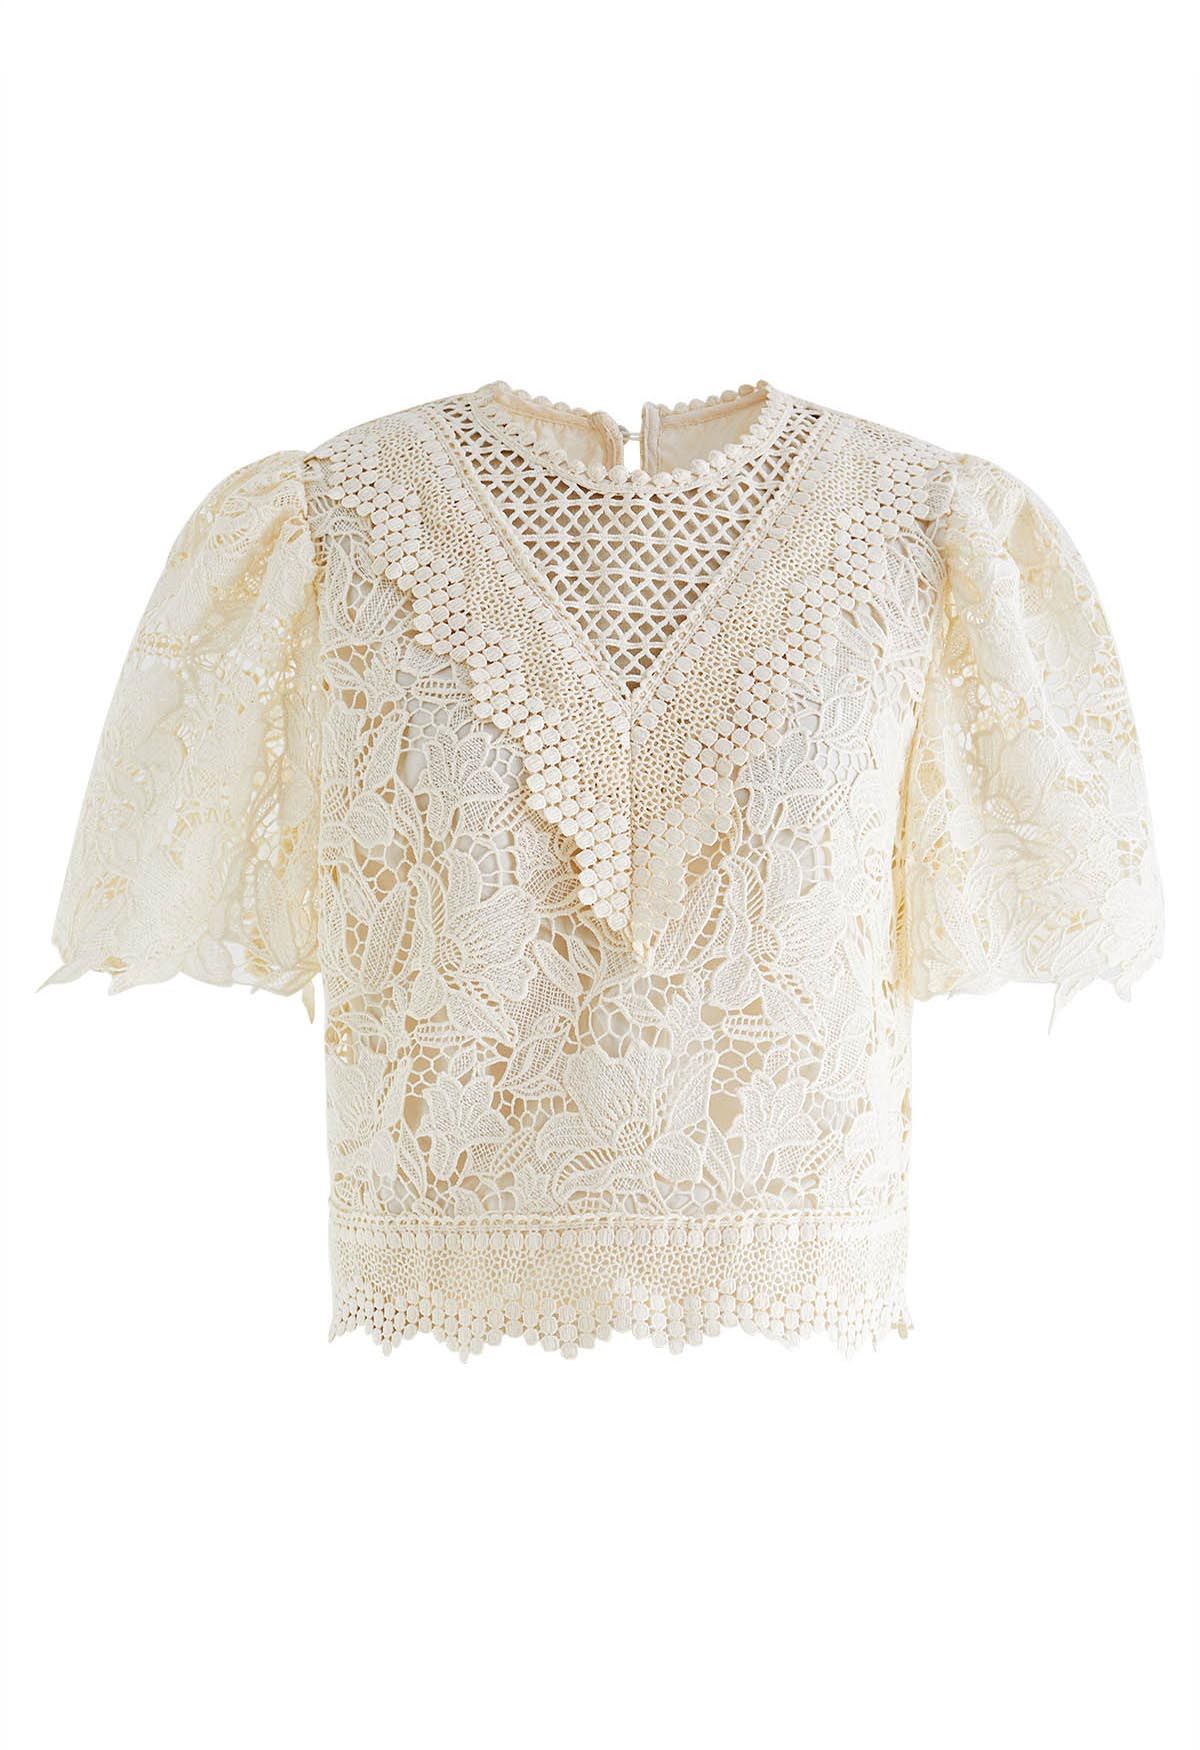 Lily Crochet Lace Crop Top in Cream - Retro, Indie and Unique Fashion